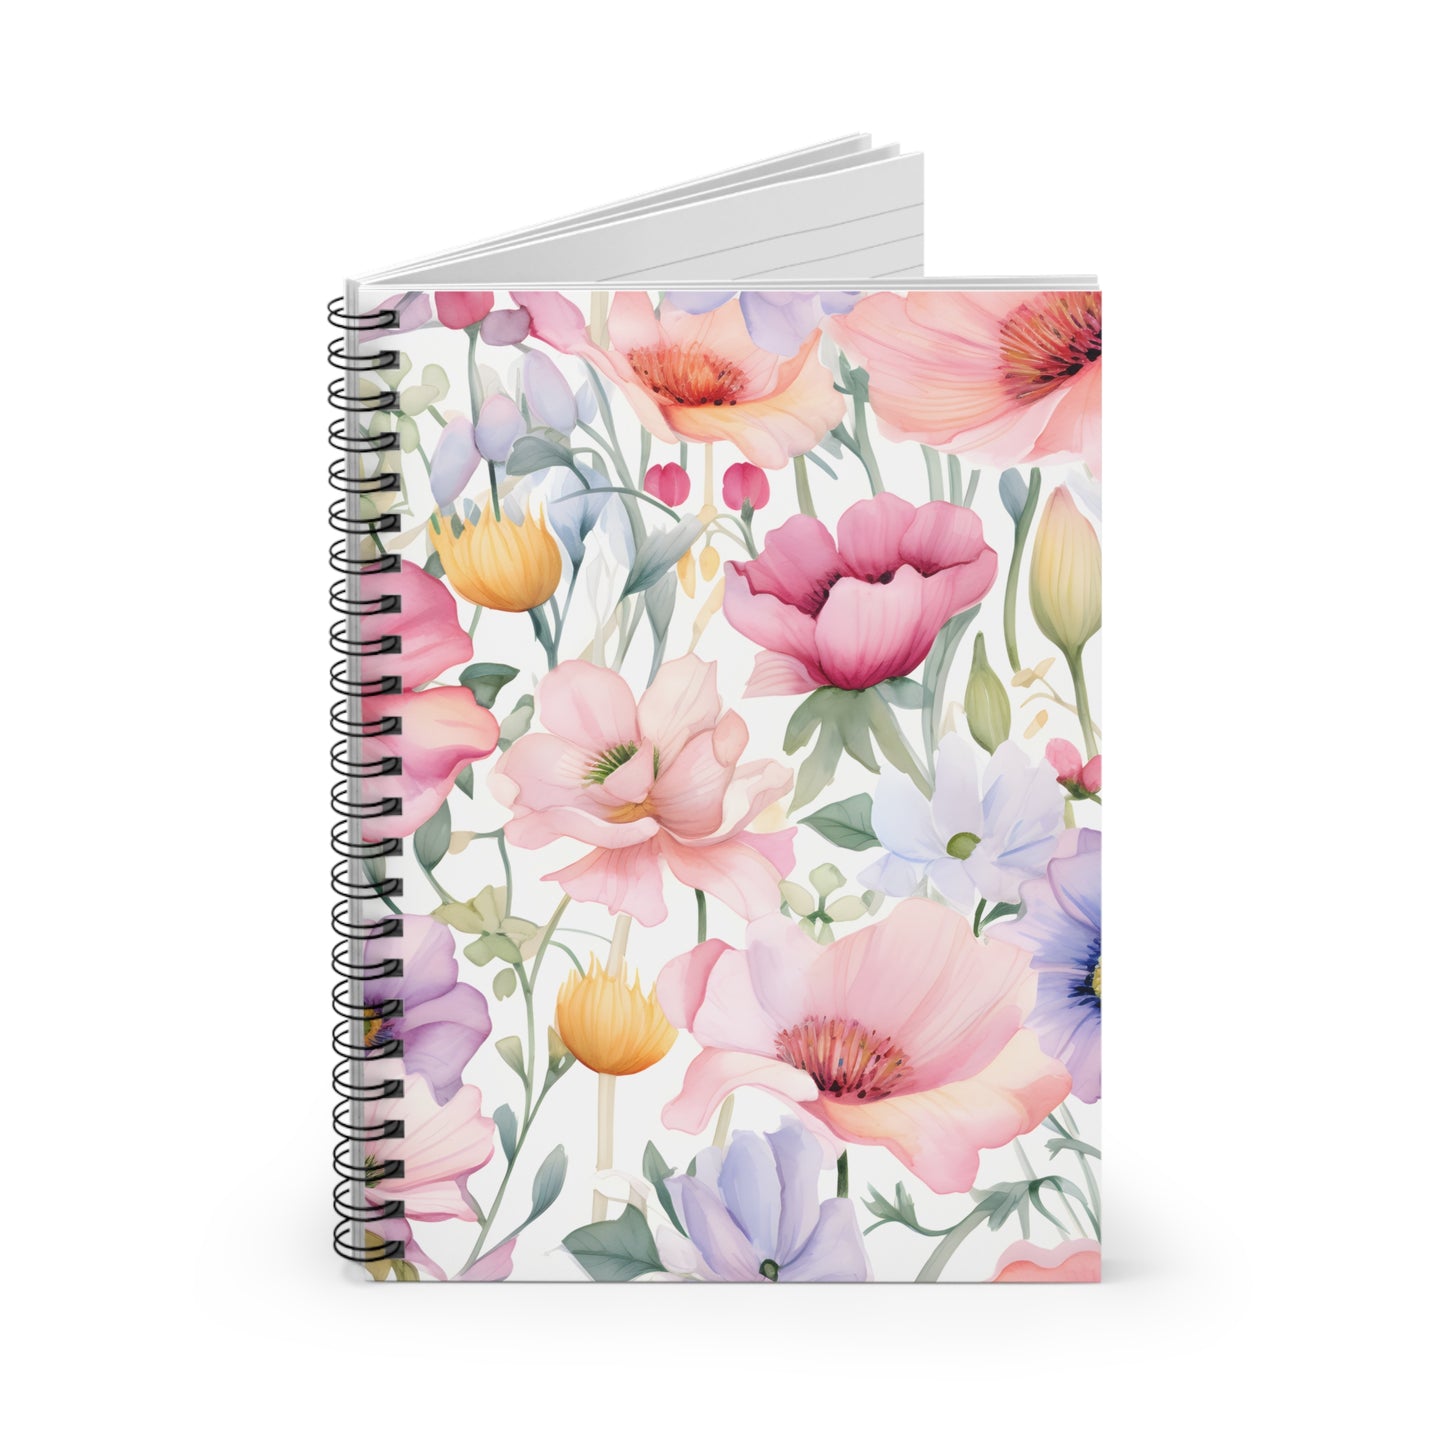 Pastel Blooms Wildflowers Spiral Notebook - Ruled Line (6" x 8")